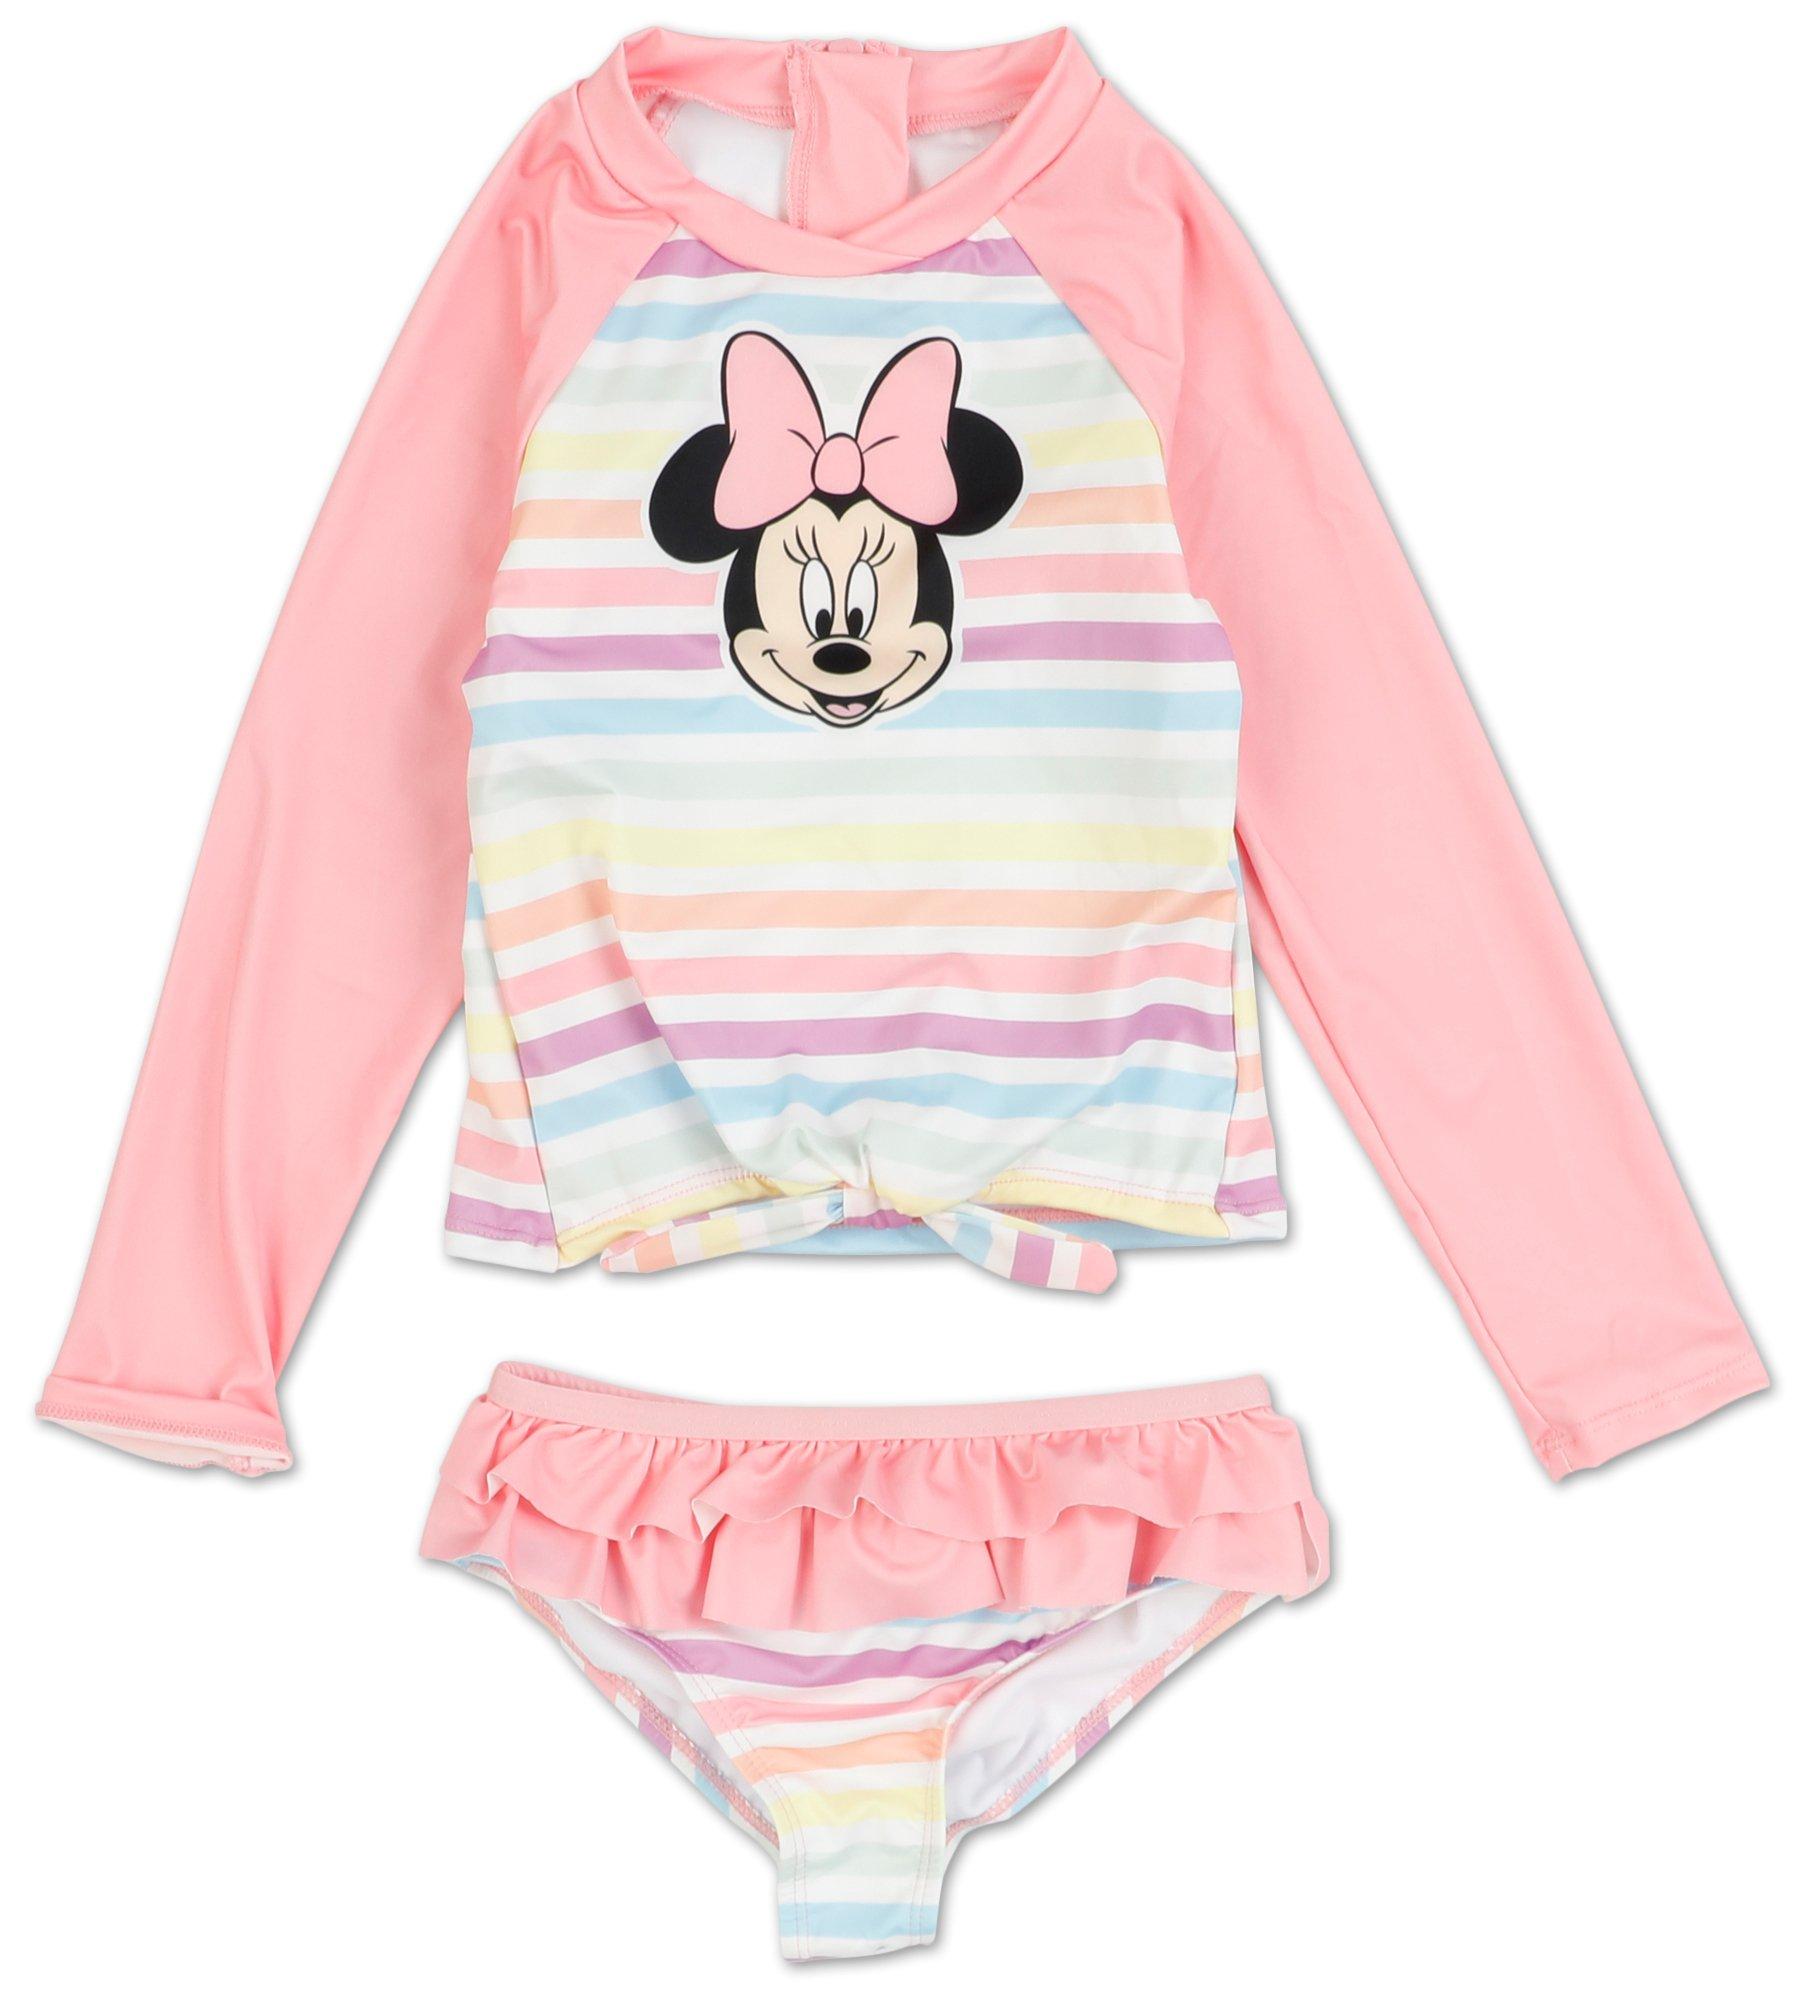 Toddler Girls 2 Pc Minnie Mouse Swimsuit Set